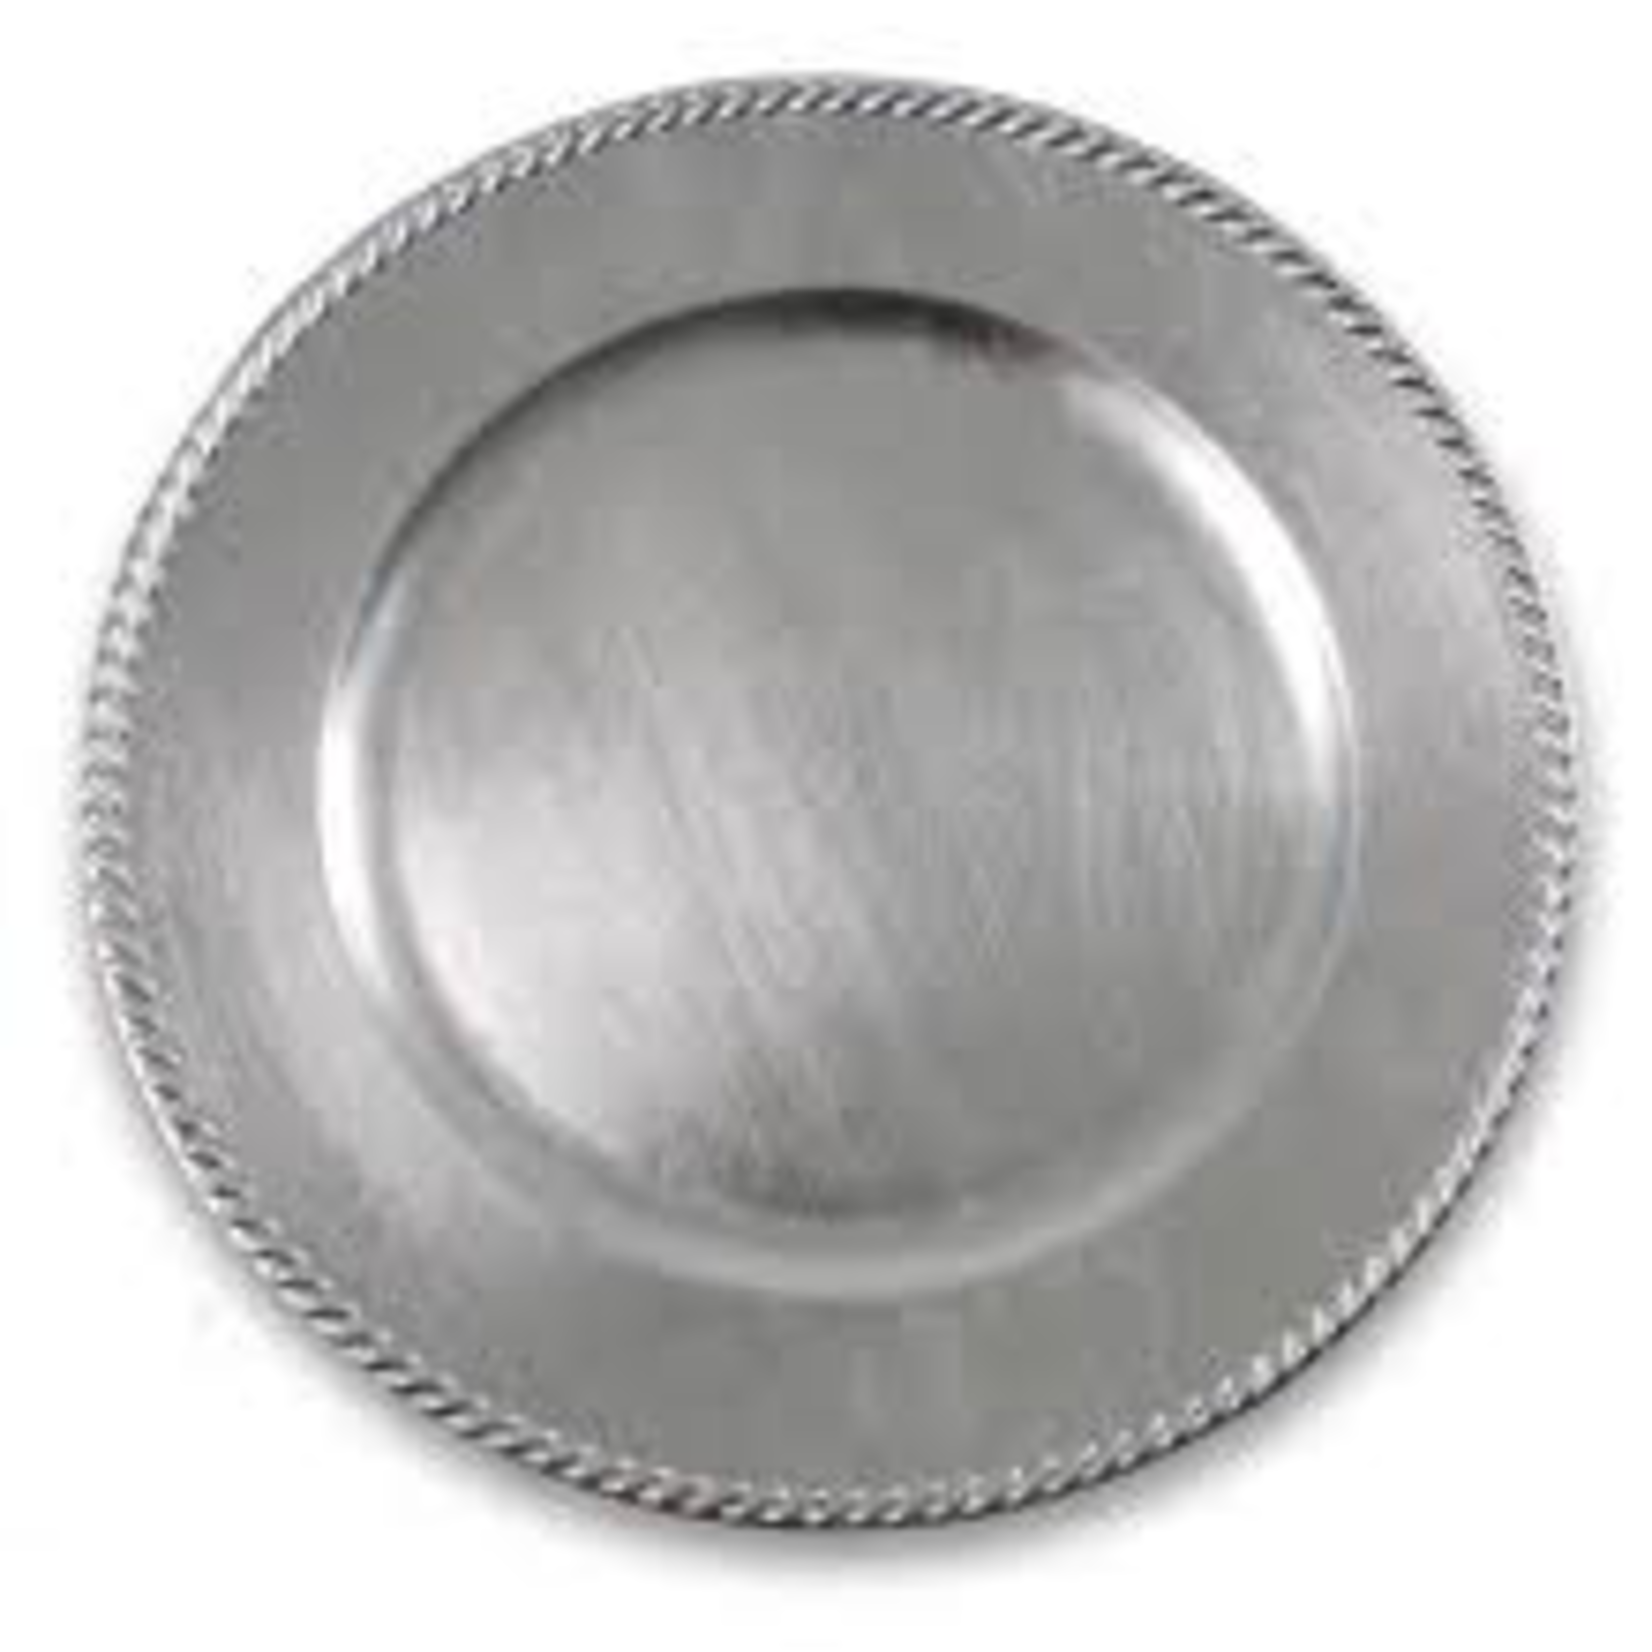 SILVER CHARGER, REG $2.99